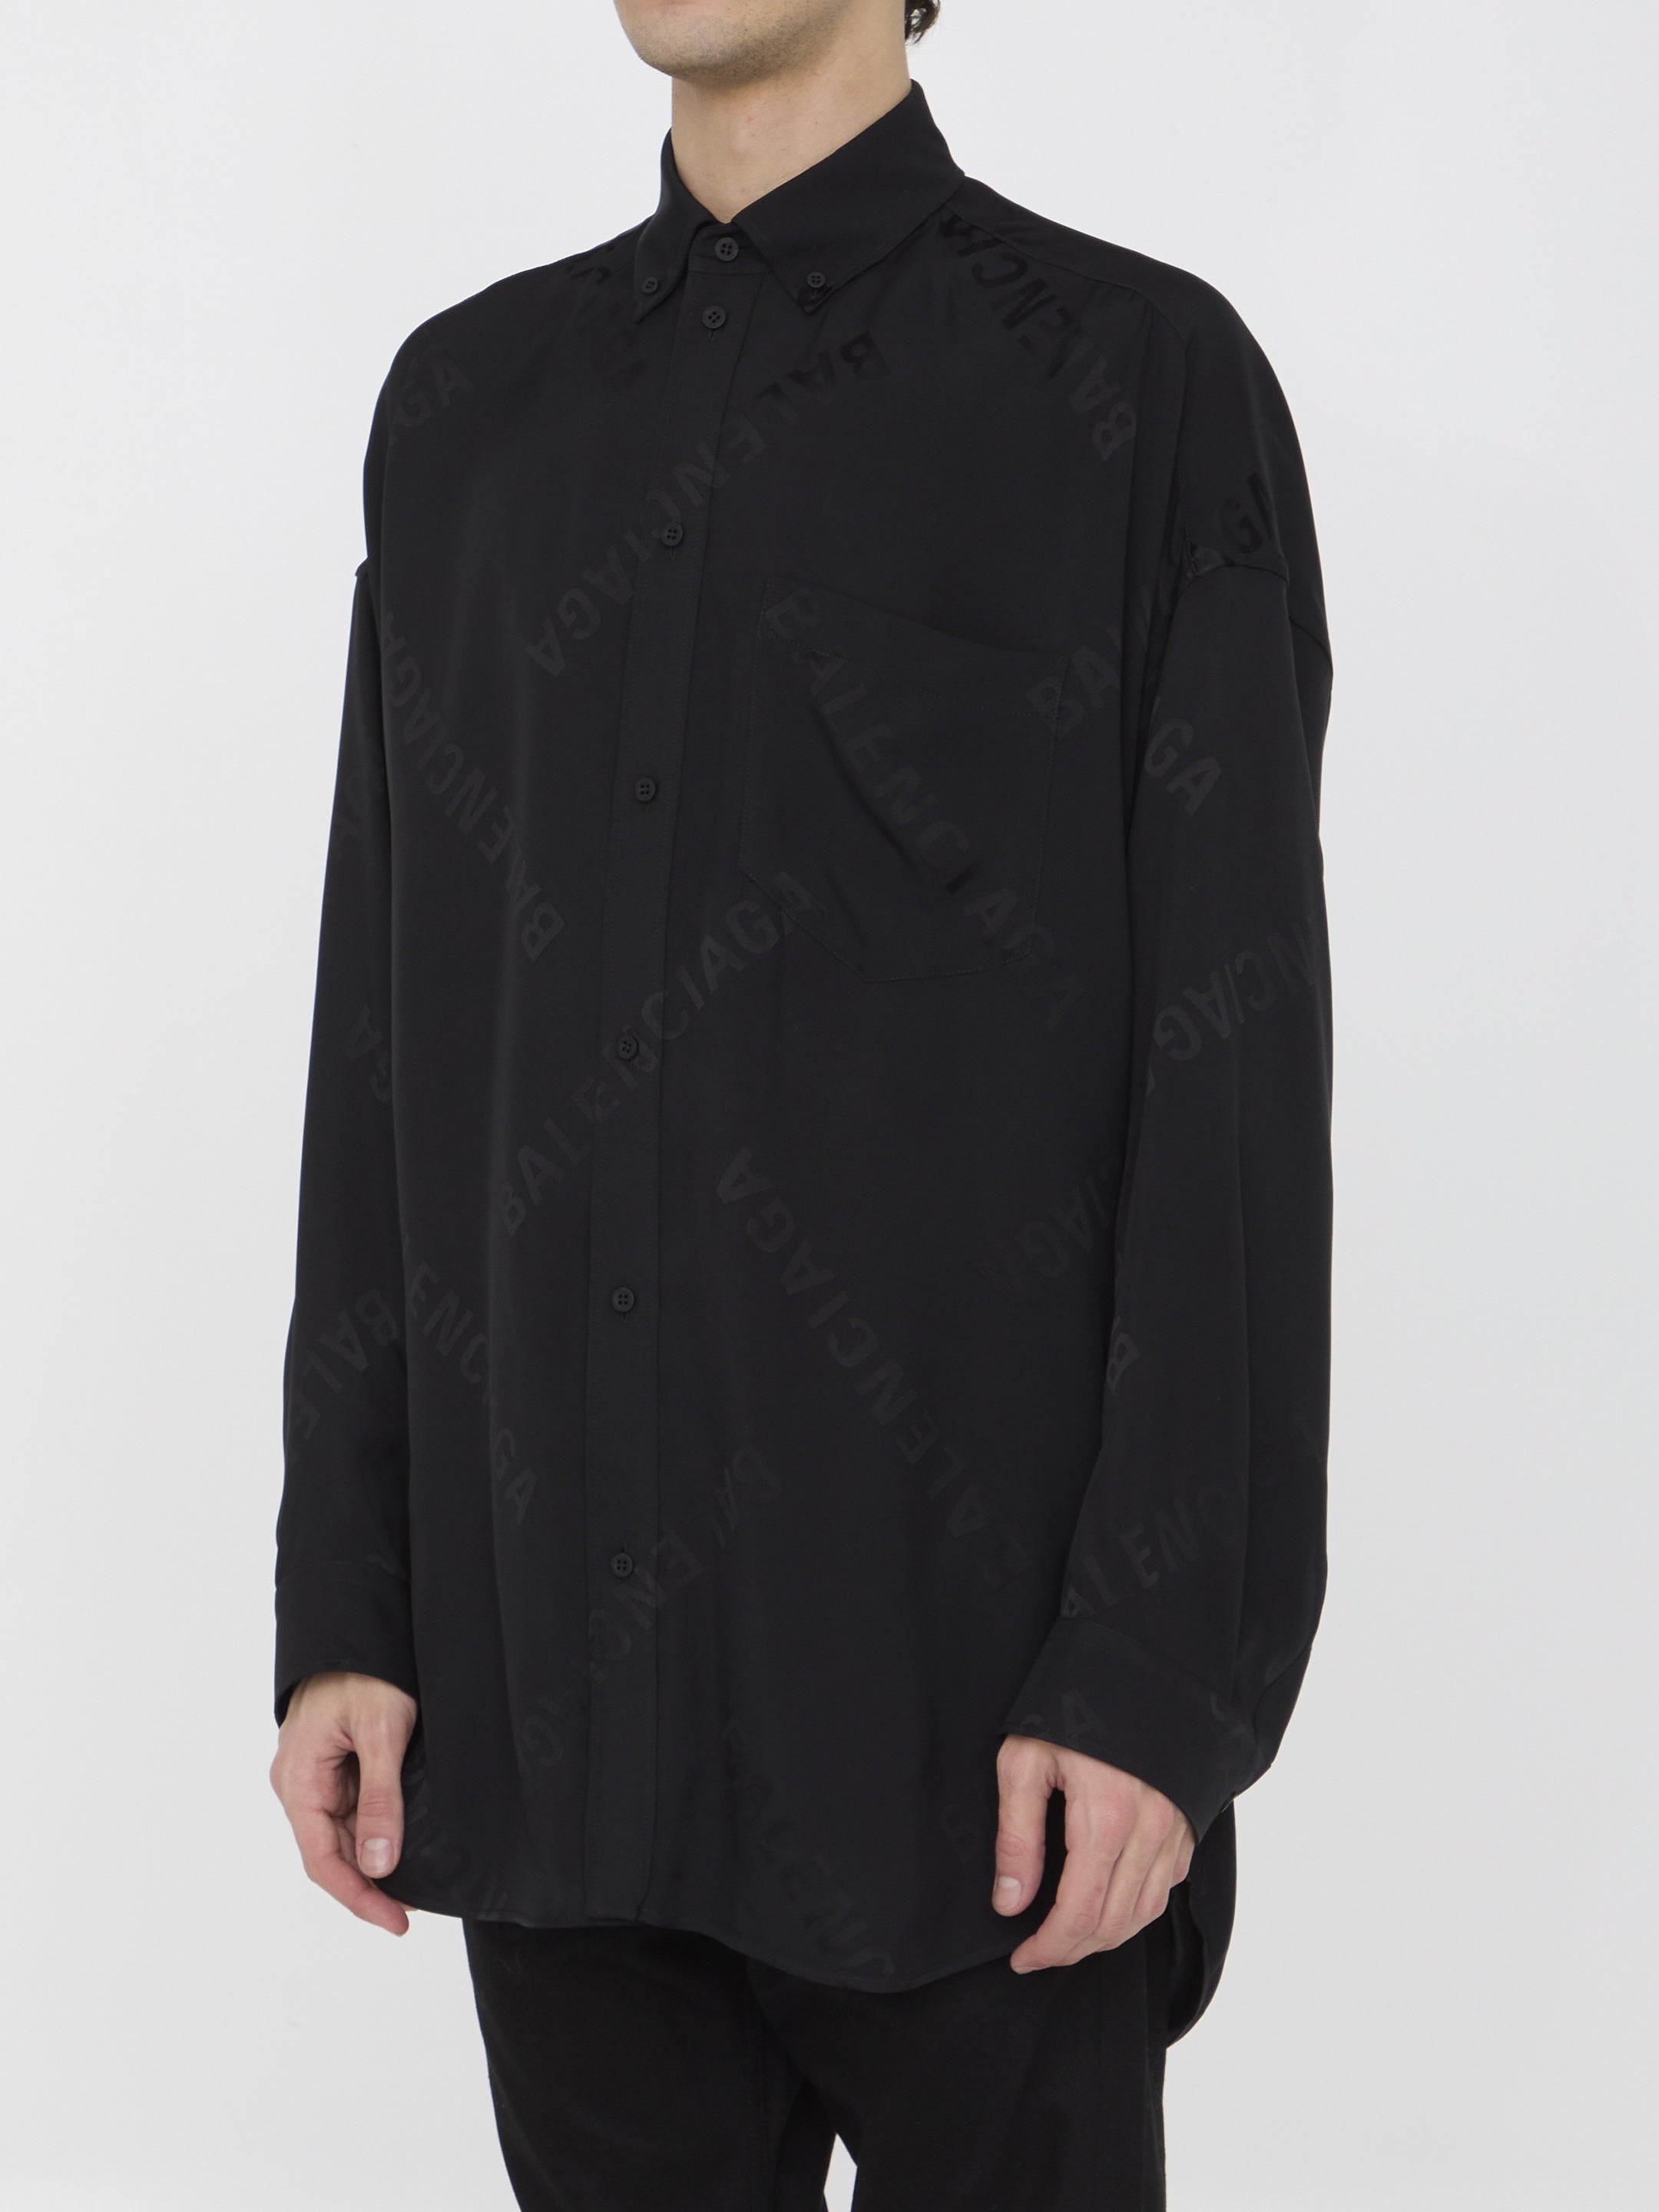 BALENCIAGA-OUTLET-SALE-Cocoon-shirt-Shirts-S-BLACK-ARCHIVE-COLLECTION-2.jpg